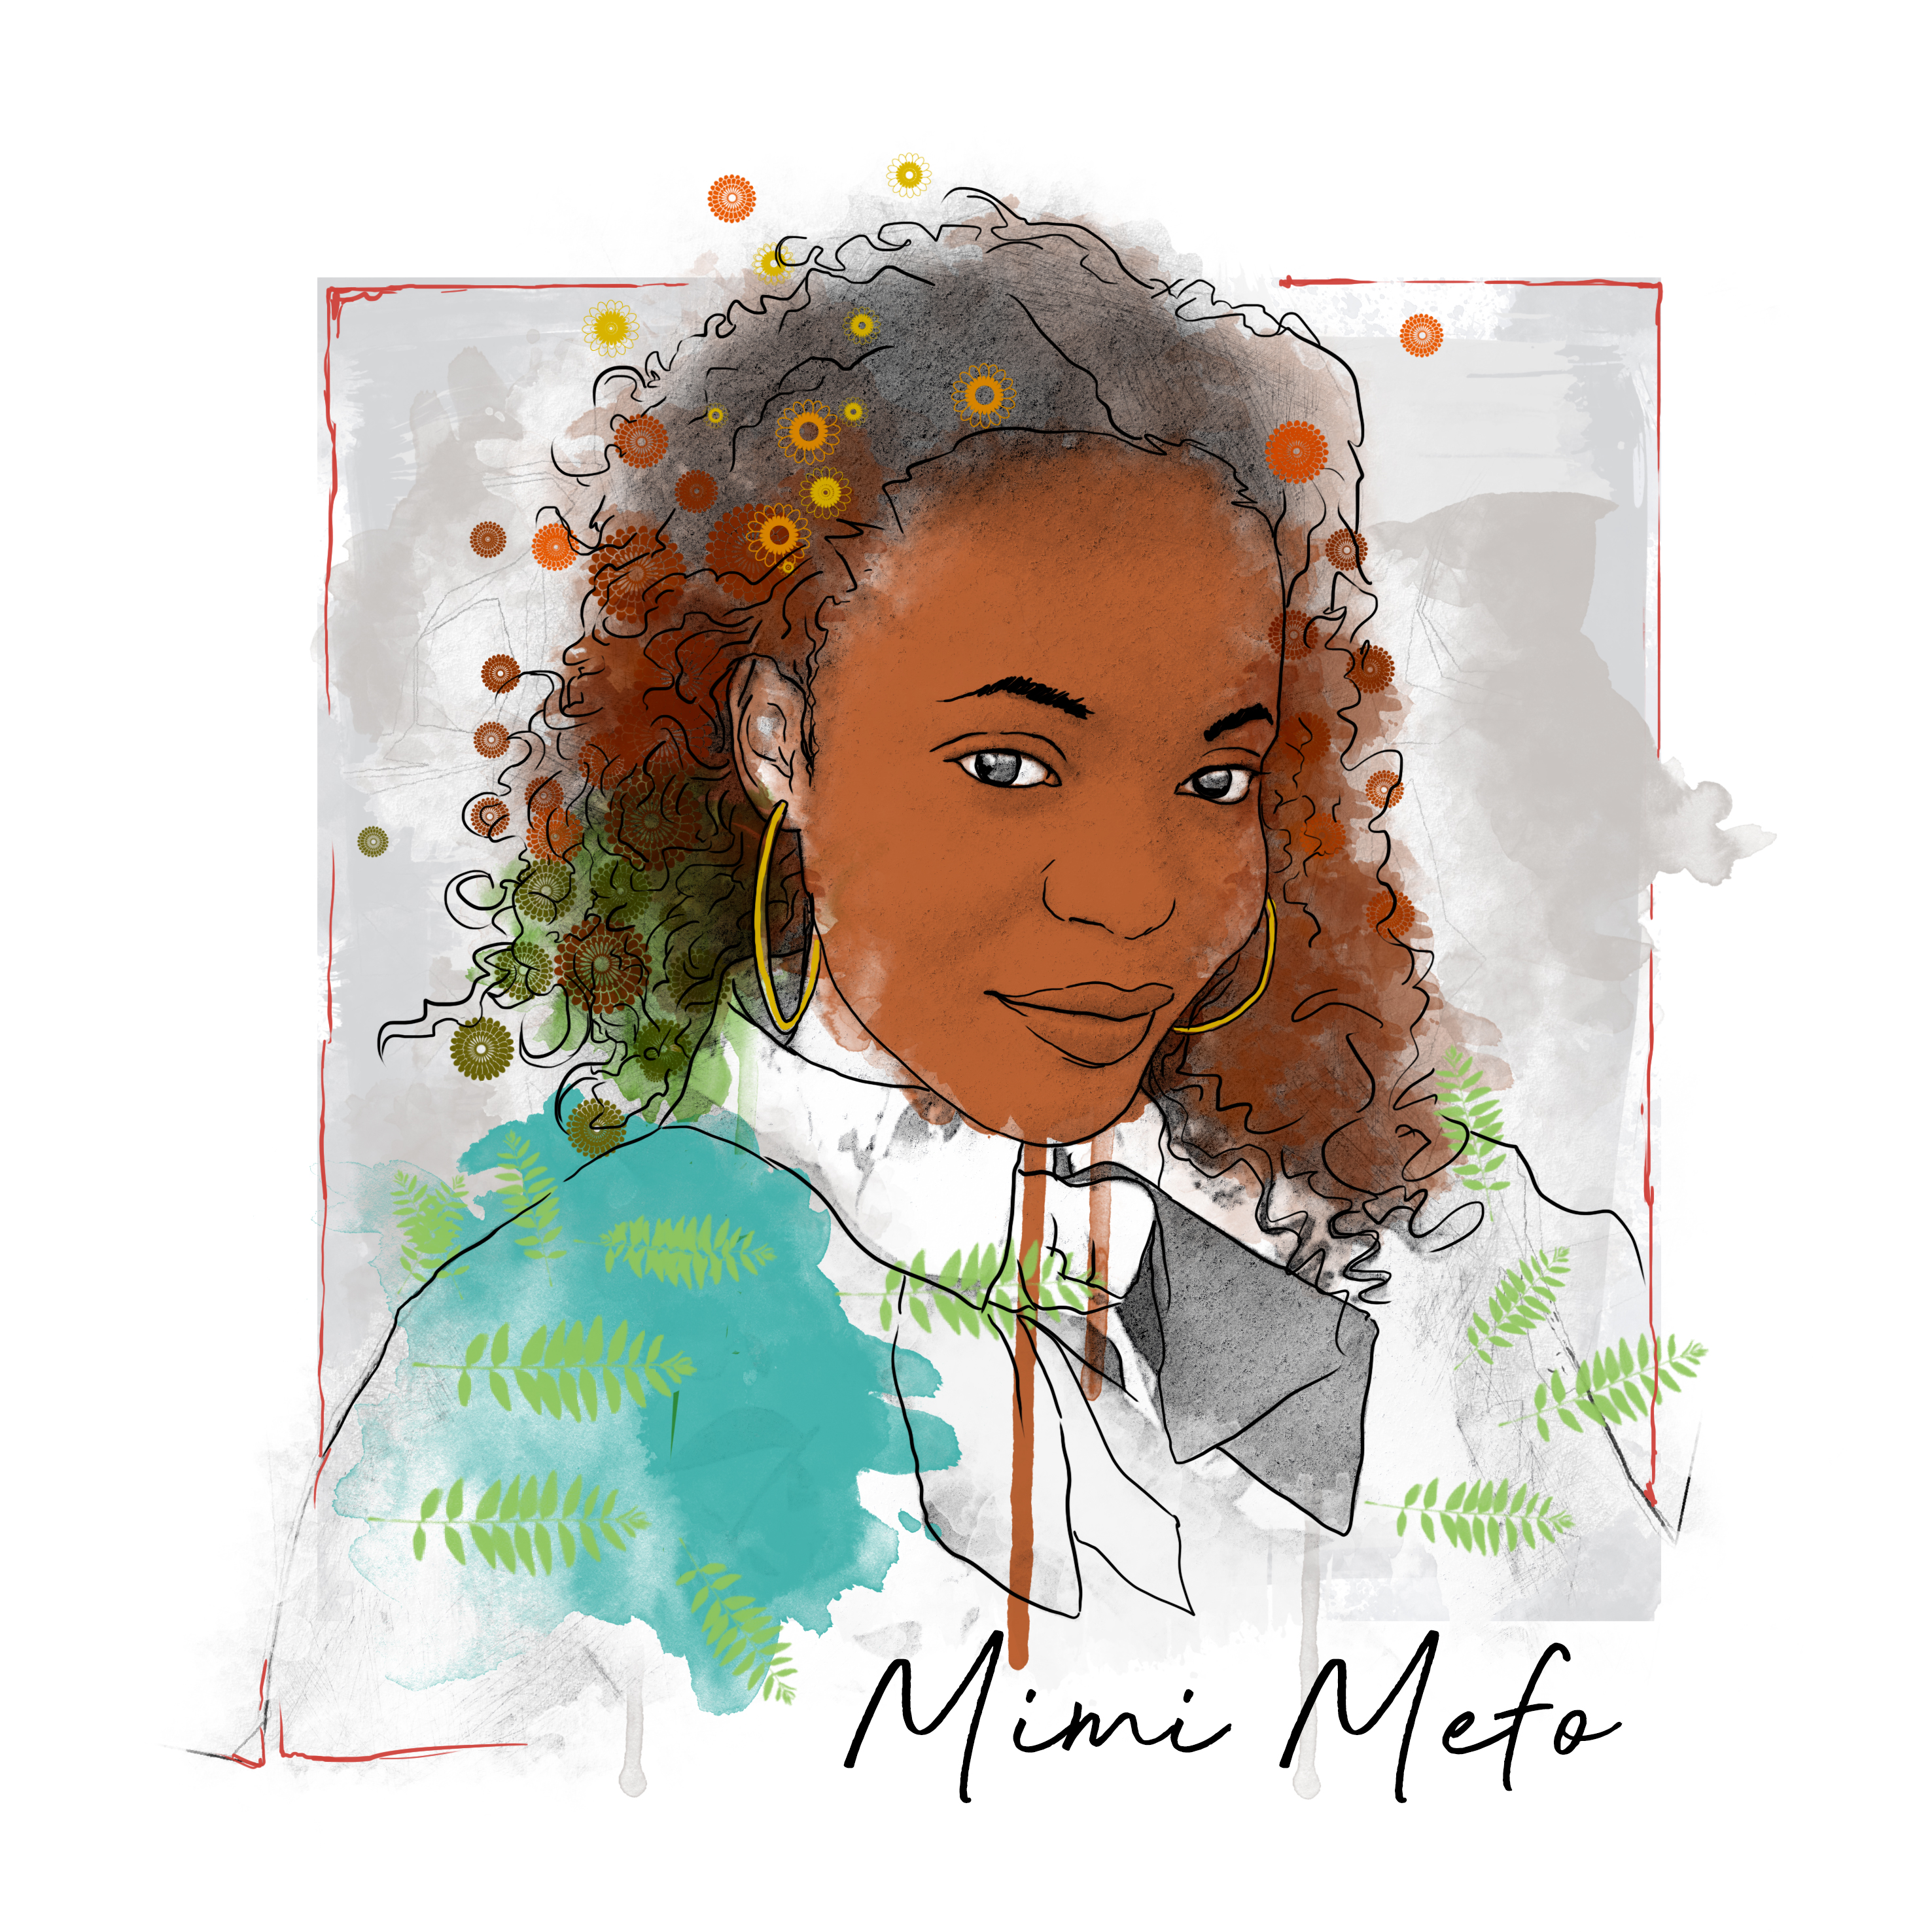 #IndexAwards2019: Mimi Mefo works without fear or favour in Cameroon’s climate of repression and self-censorship